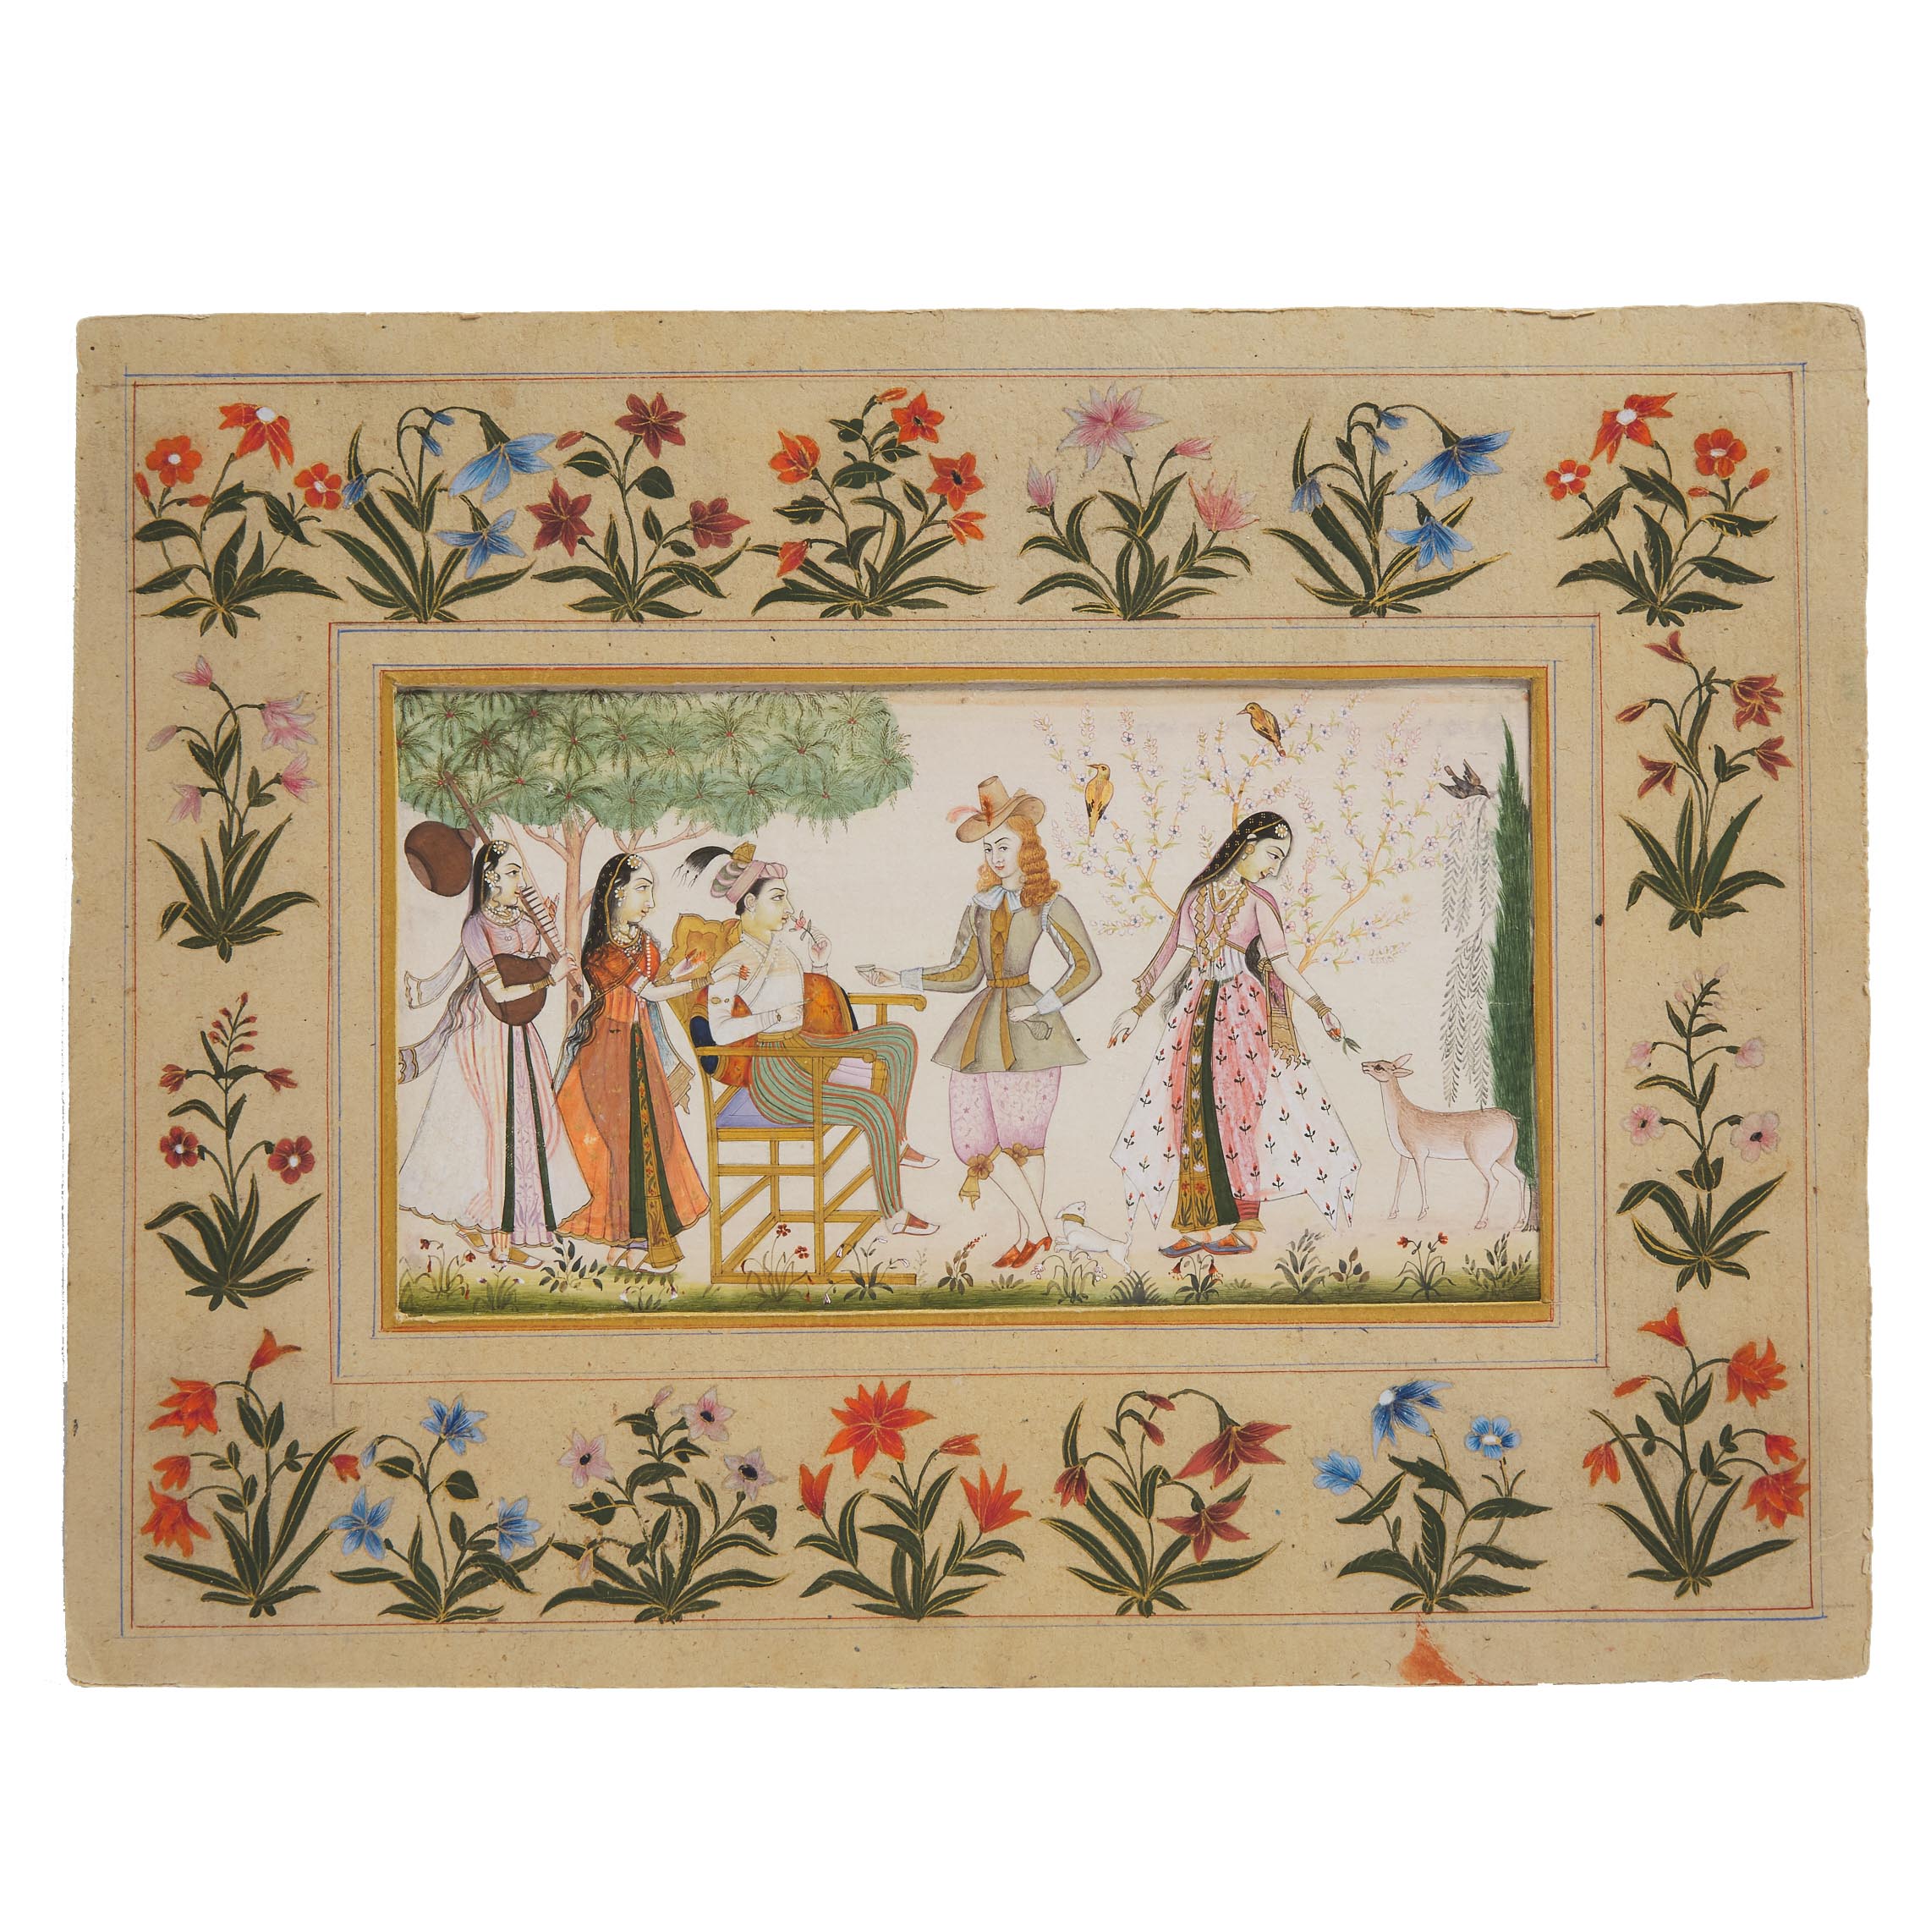 An Indian Miniature Painting of a Courtly Scene with a European Dandy, 19th Century or Earlier